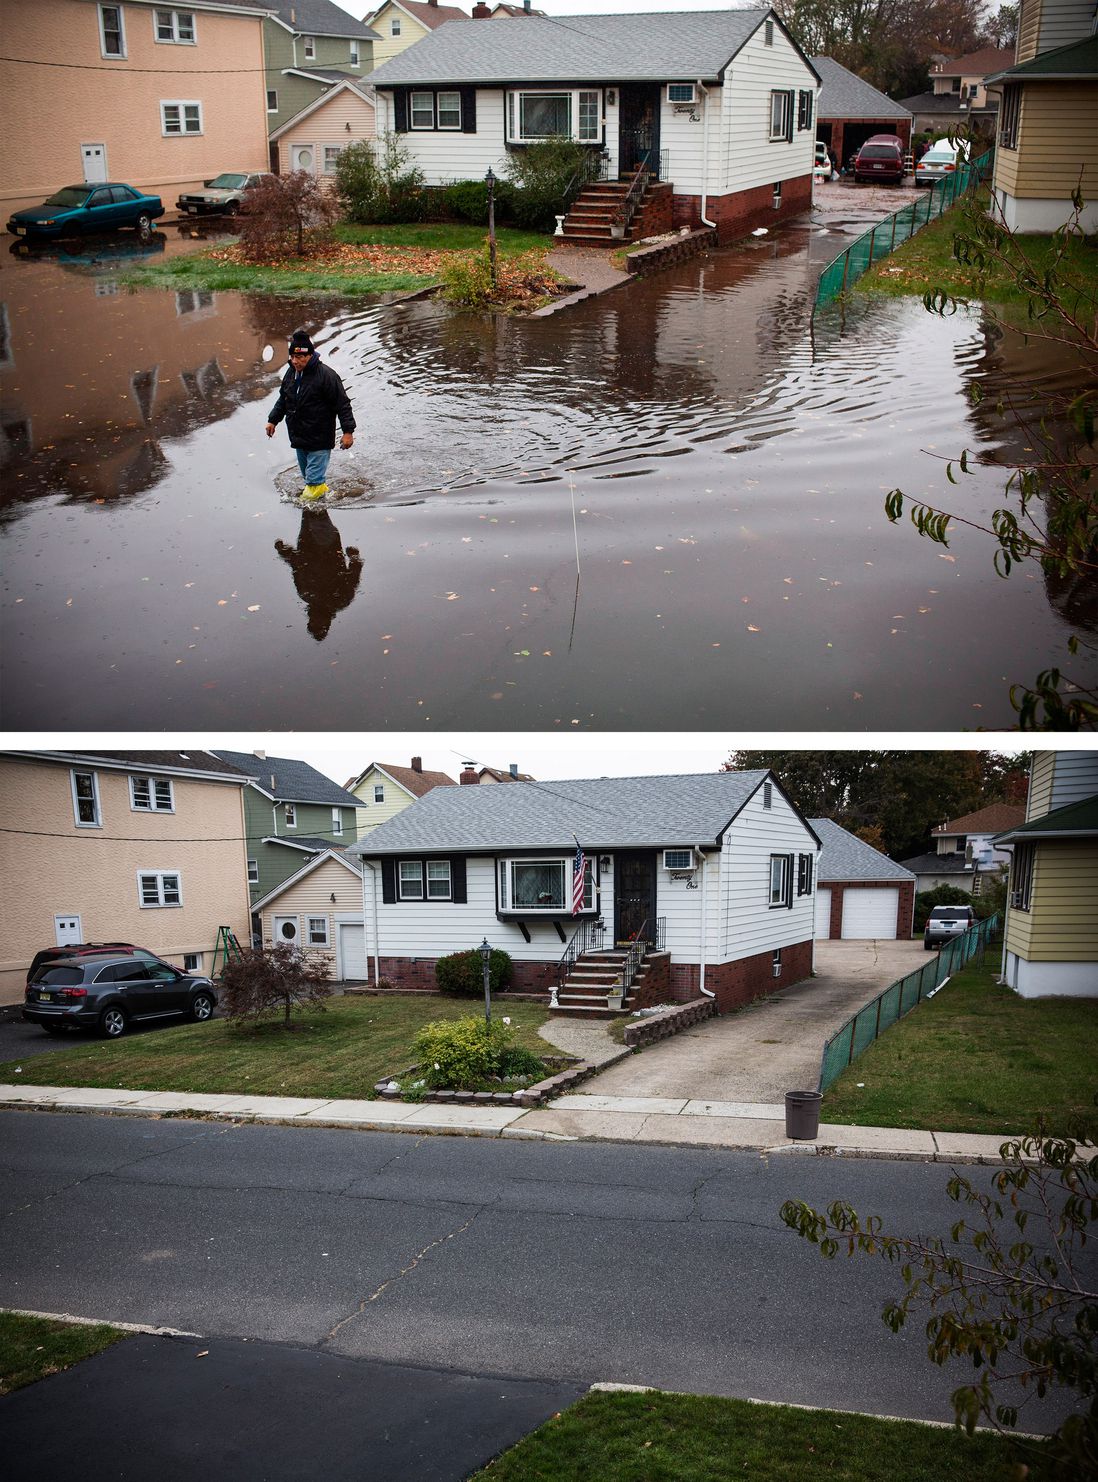 [Top] A man walks through a flooded street after Superstorm Sandy, on October 30, 2012, in Little Ferry, New Jersey. [Bottom] The same house is shown in Little Ferry, New Jersey October 22, 2013.